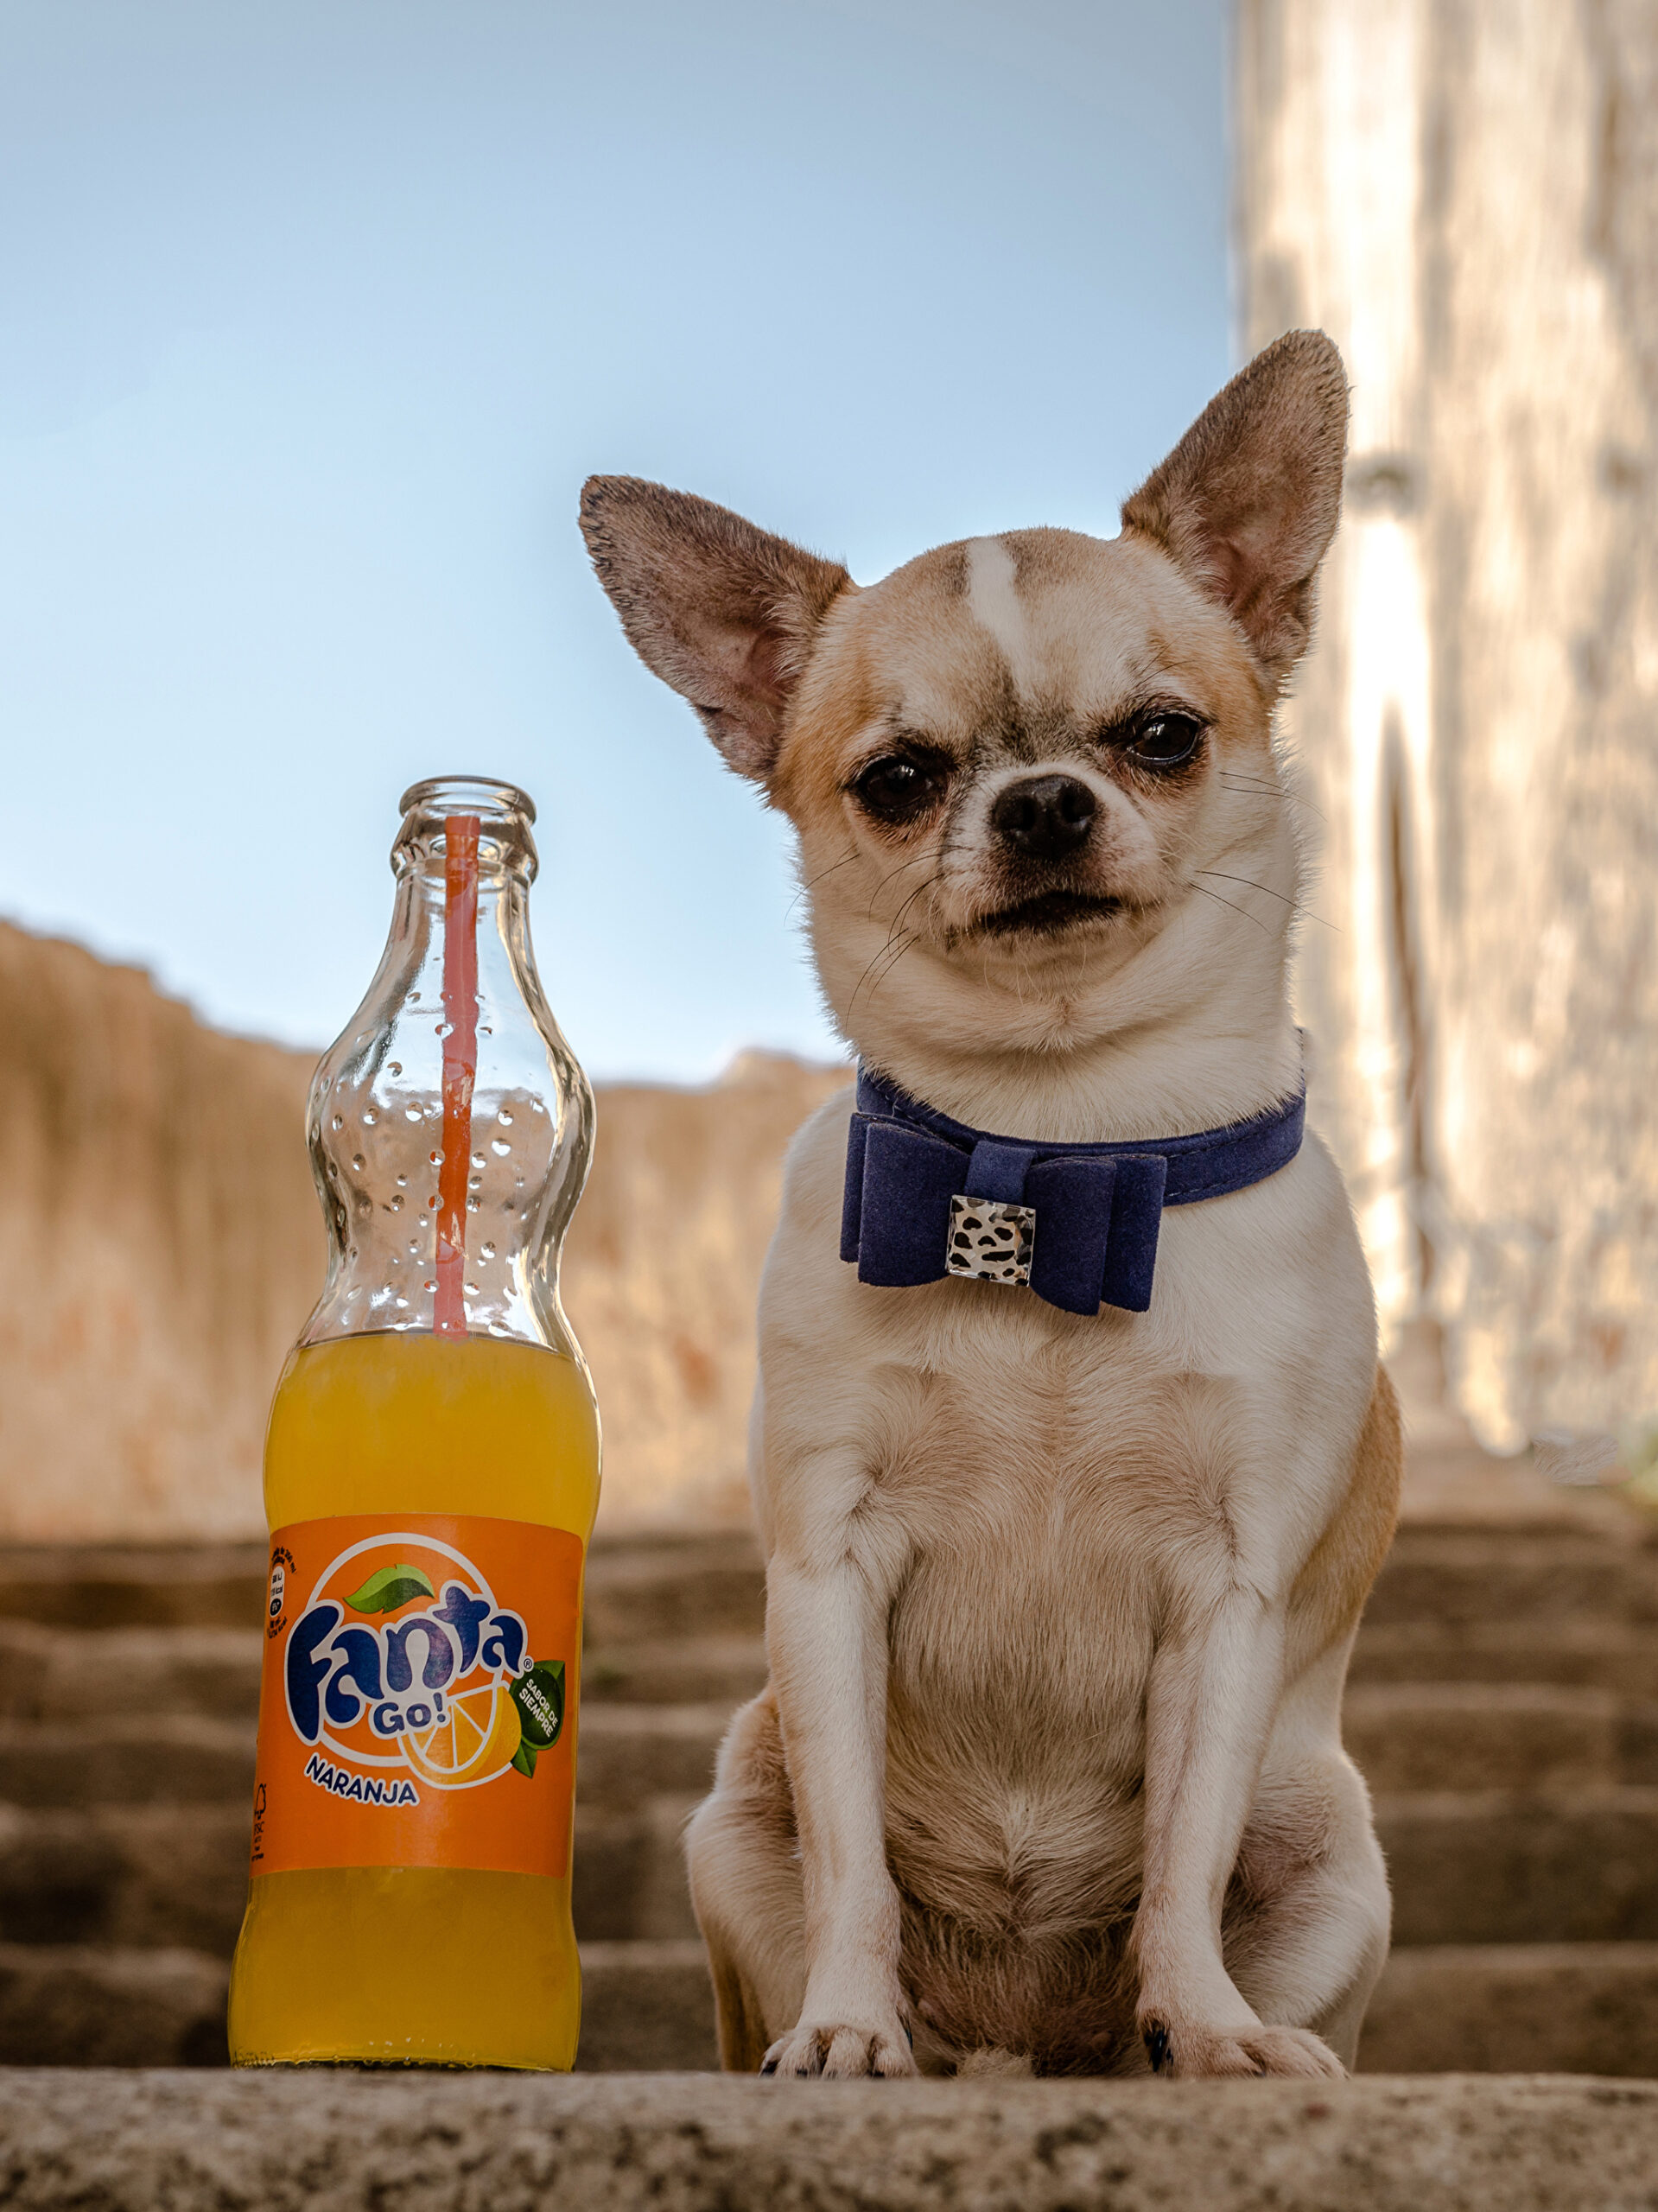 Wallpapers Chihuahua Dogs Fanta stairway Bottle Glance